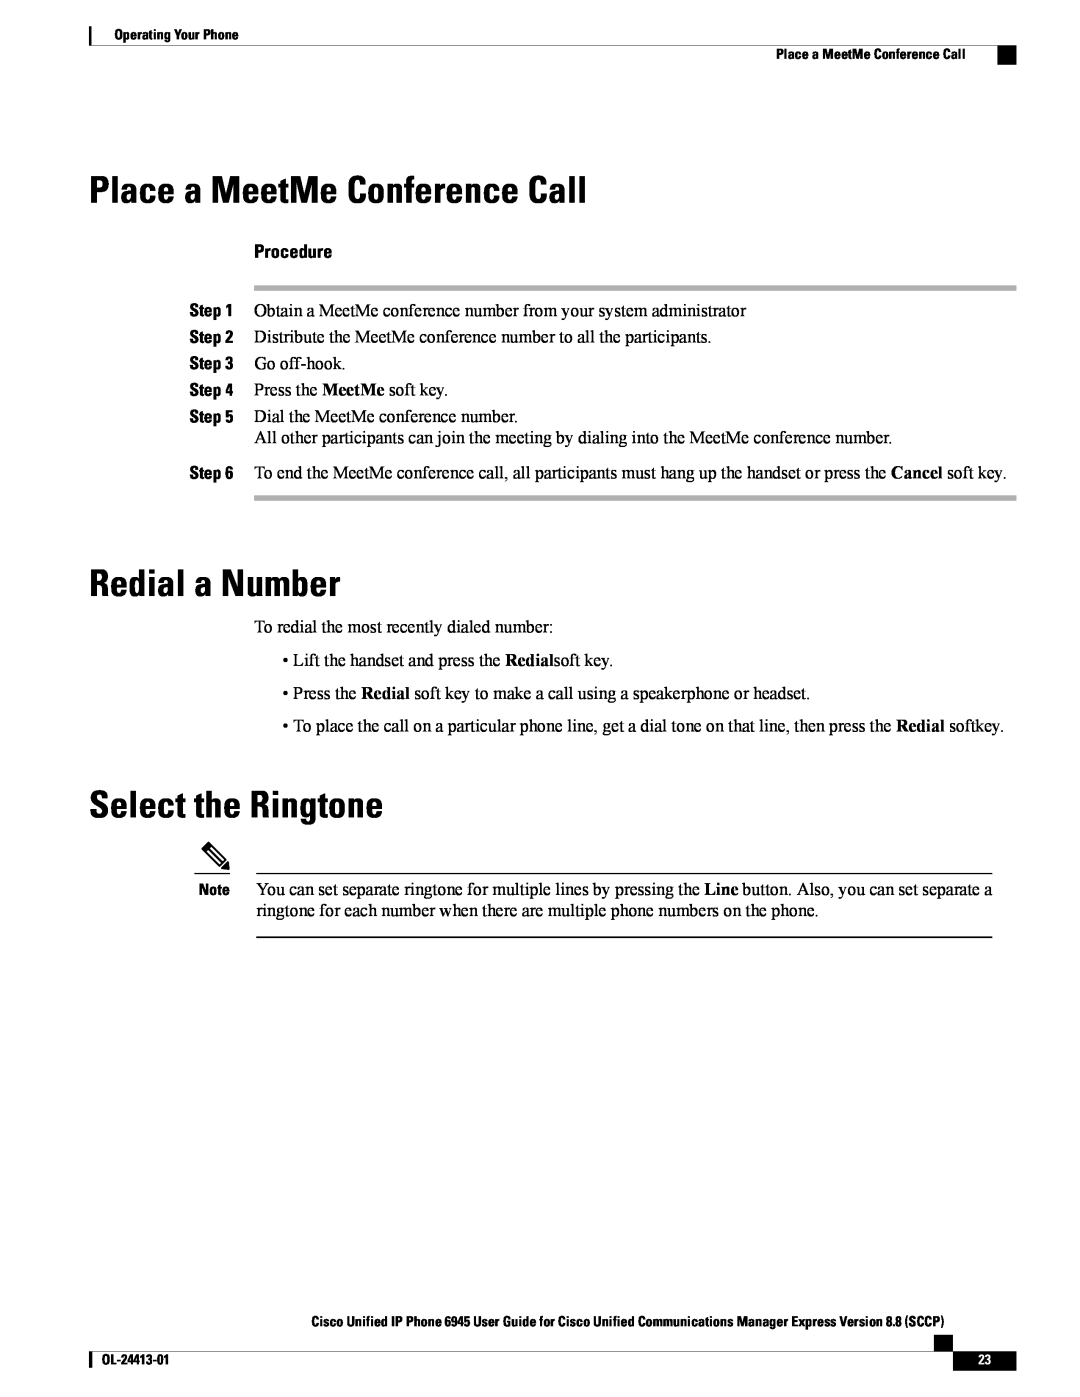 Cisco Systems 6945 manual Place a MeetMe Conference Call, Redial a Number, Select the Ringtone, Procedure 